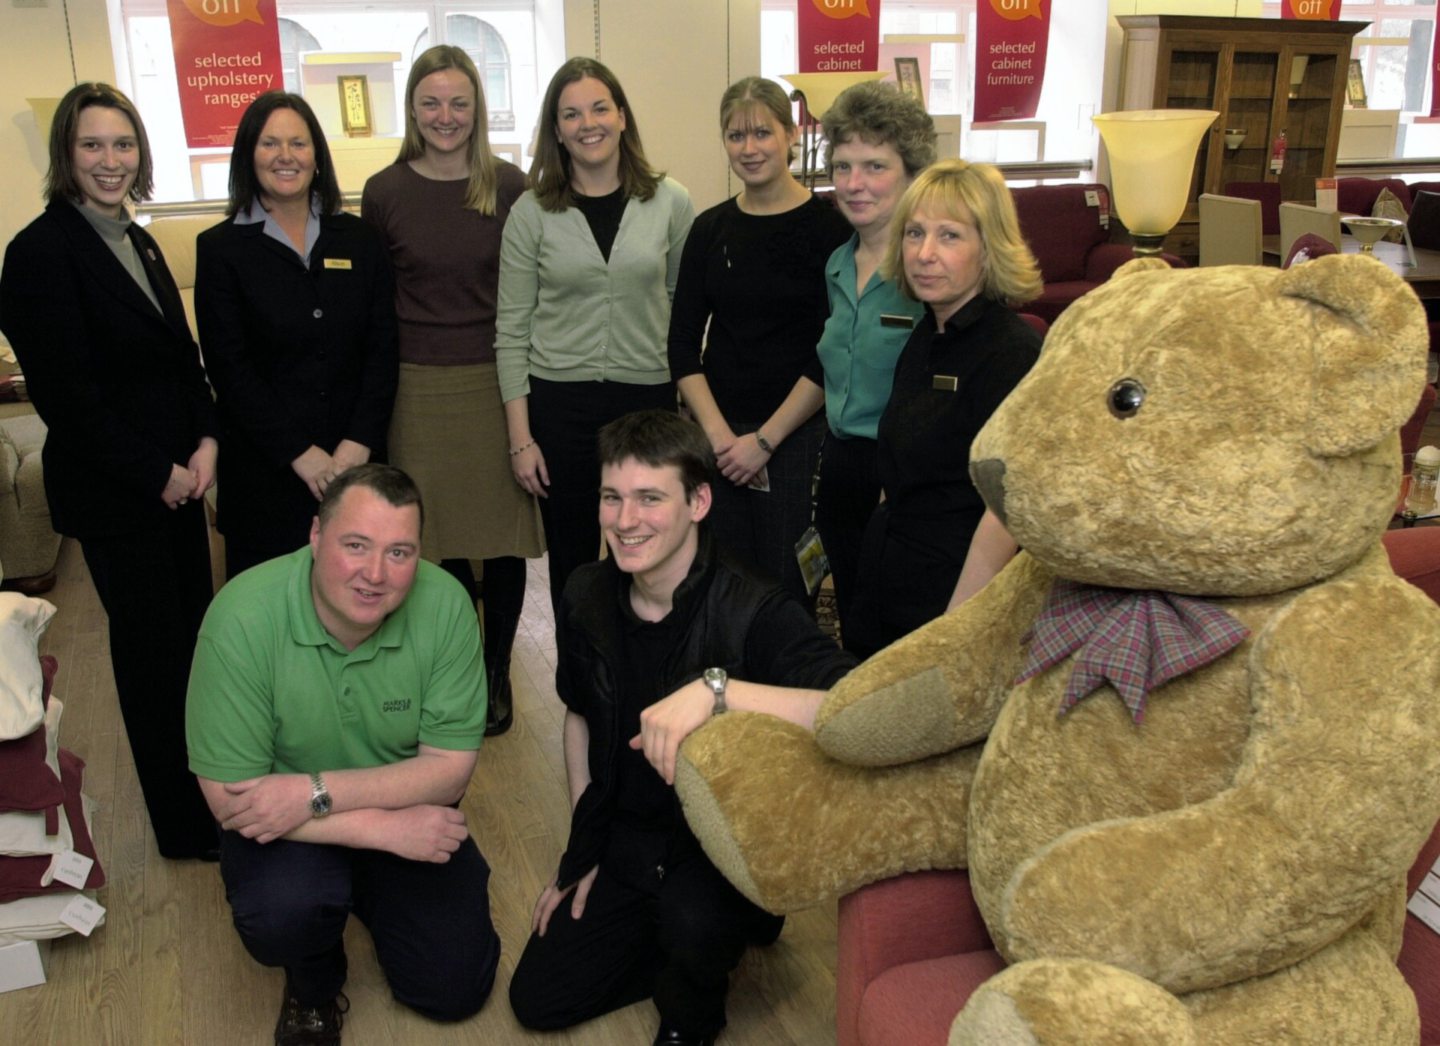 Marks and Spencer staff with a giant teddy bear